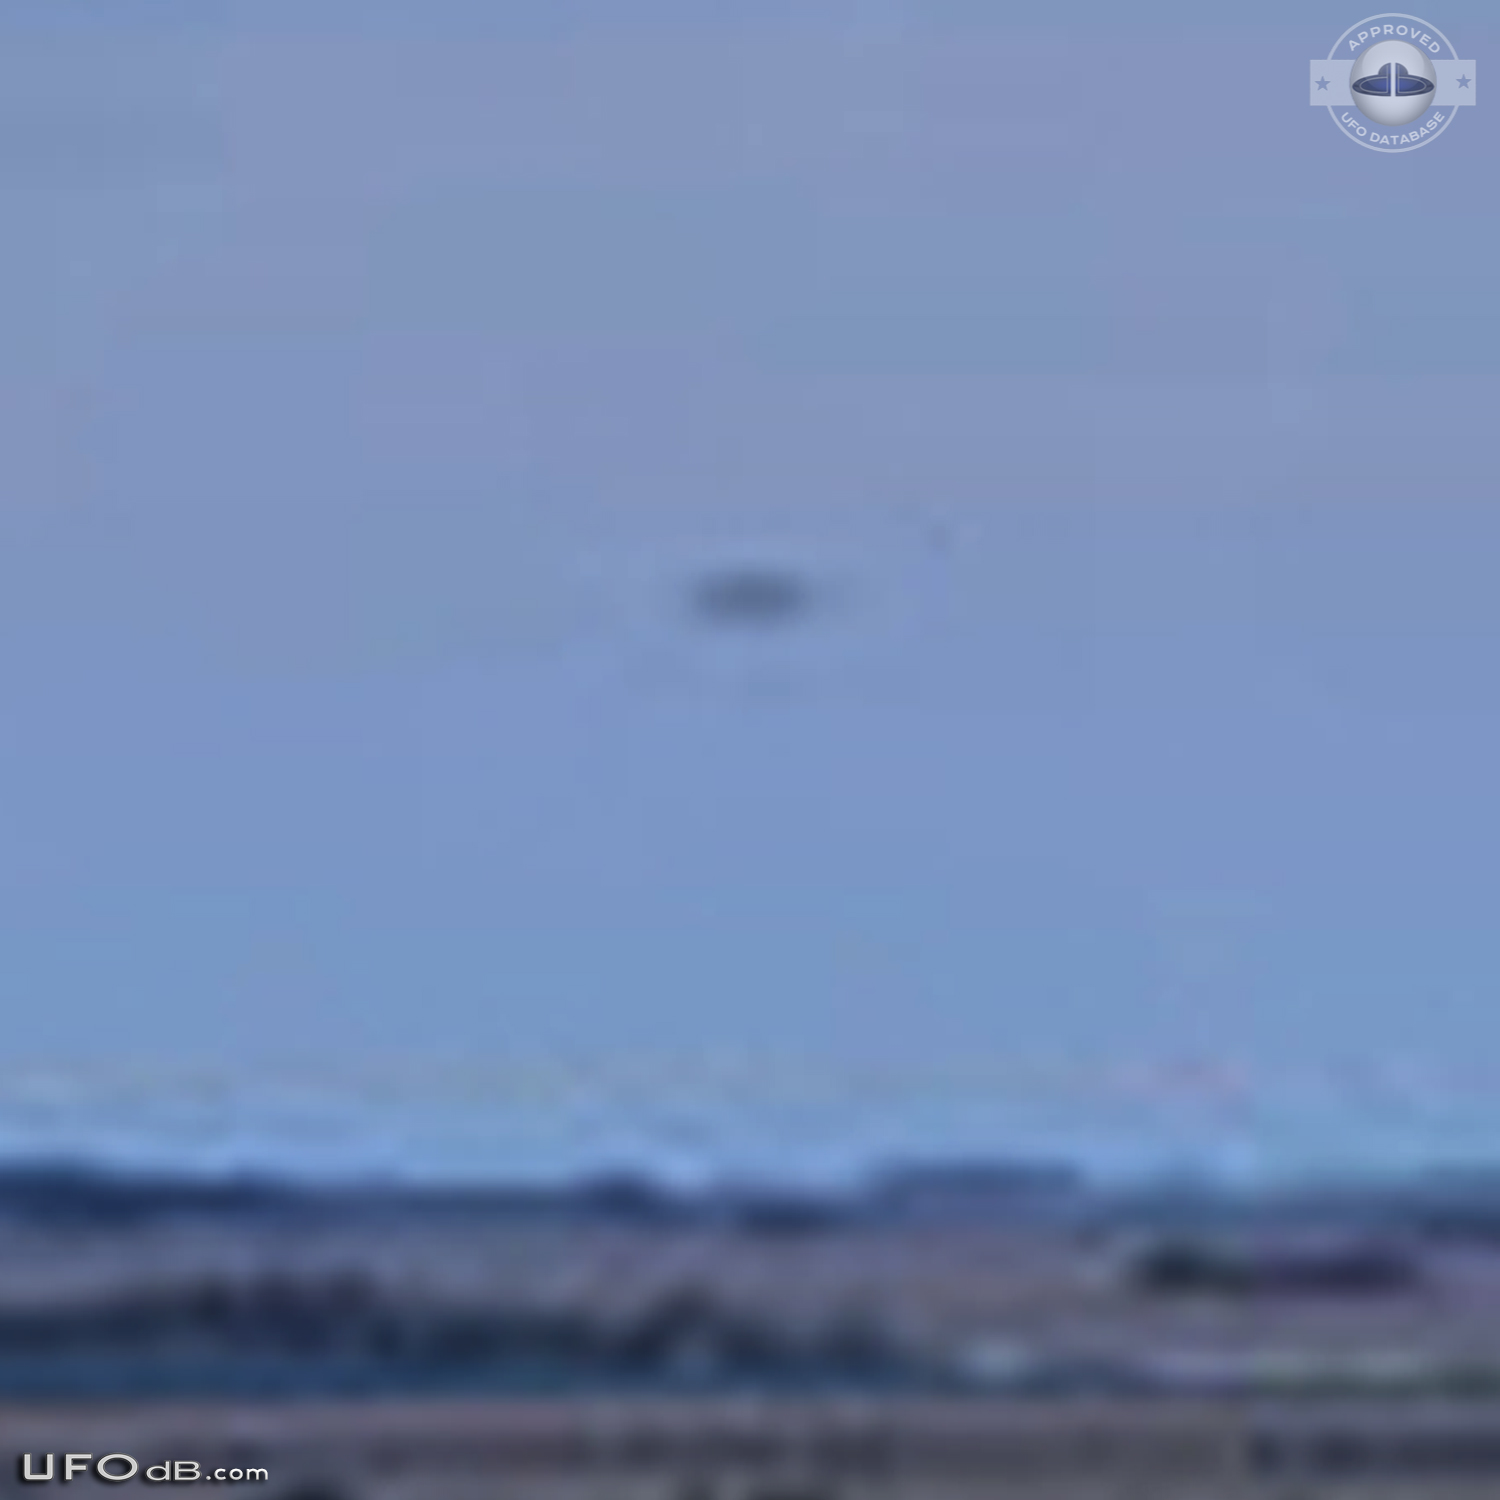 UFO picture showing Saucer in the distance in Suco, Cordoba, Argentina UFO Picture #555-4